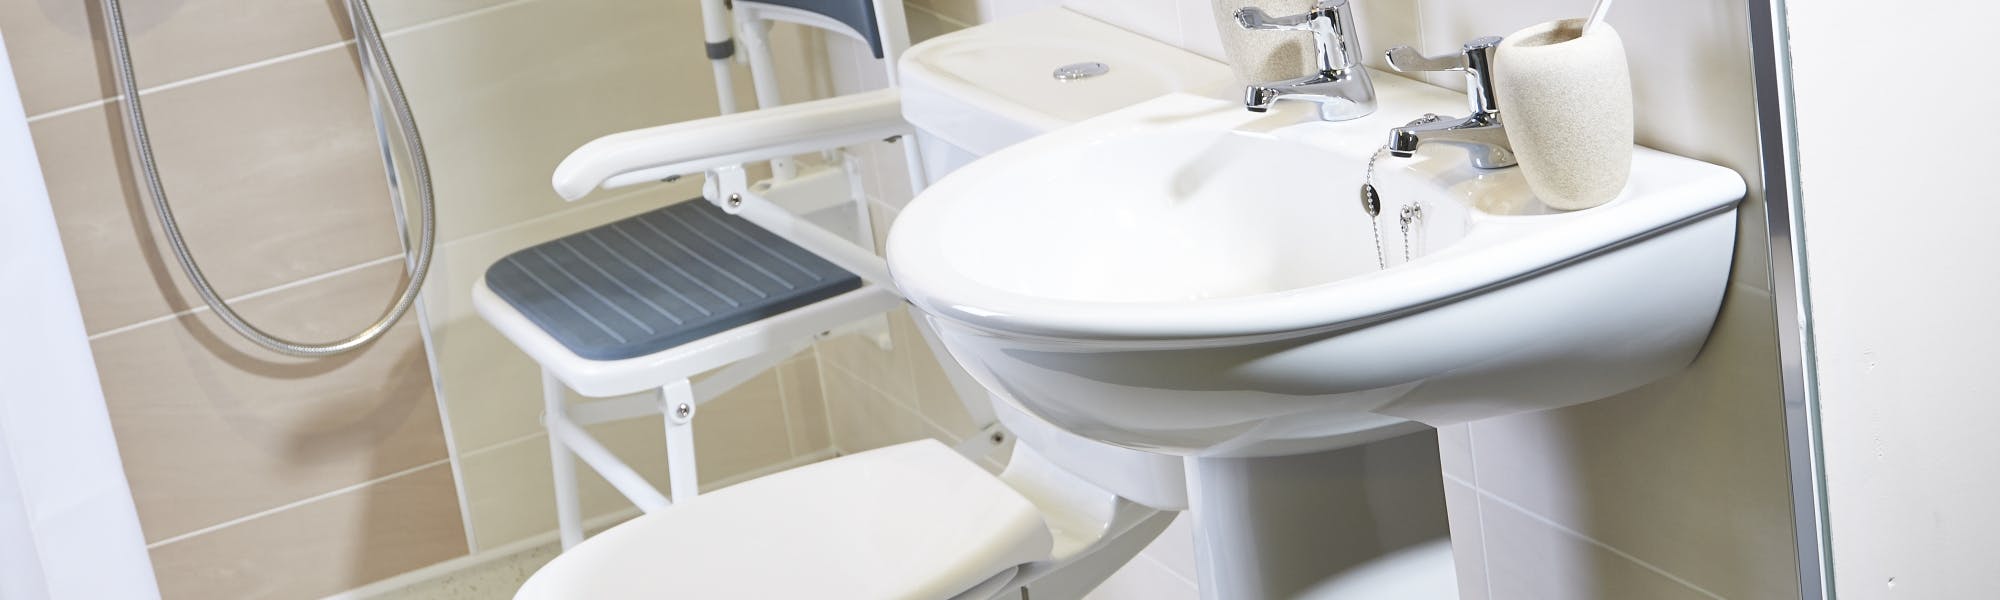 At out disabled bathroom showroom in Leeds we have a number of accessible bathroom design finishing touches that will help transform your adaptation.